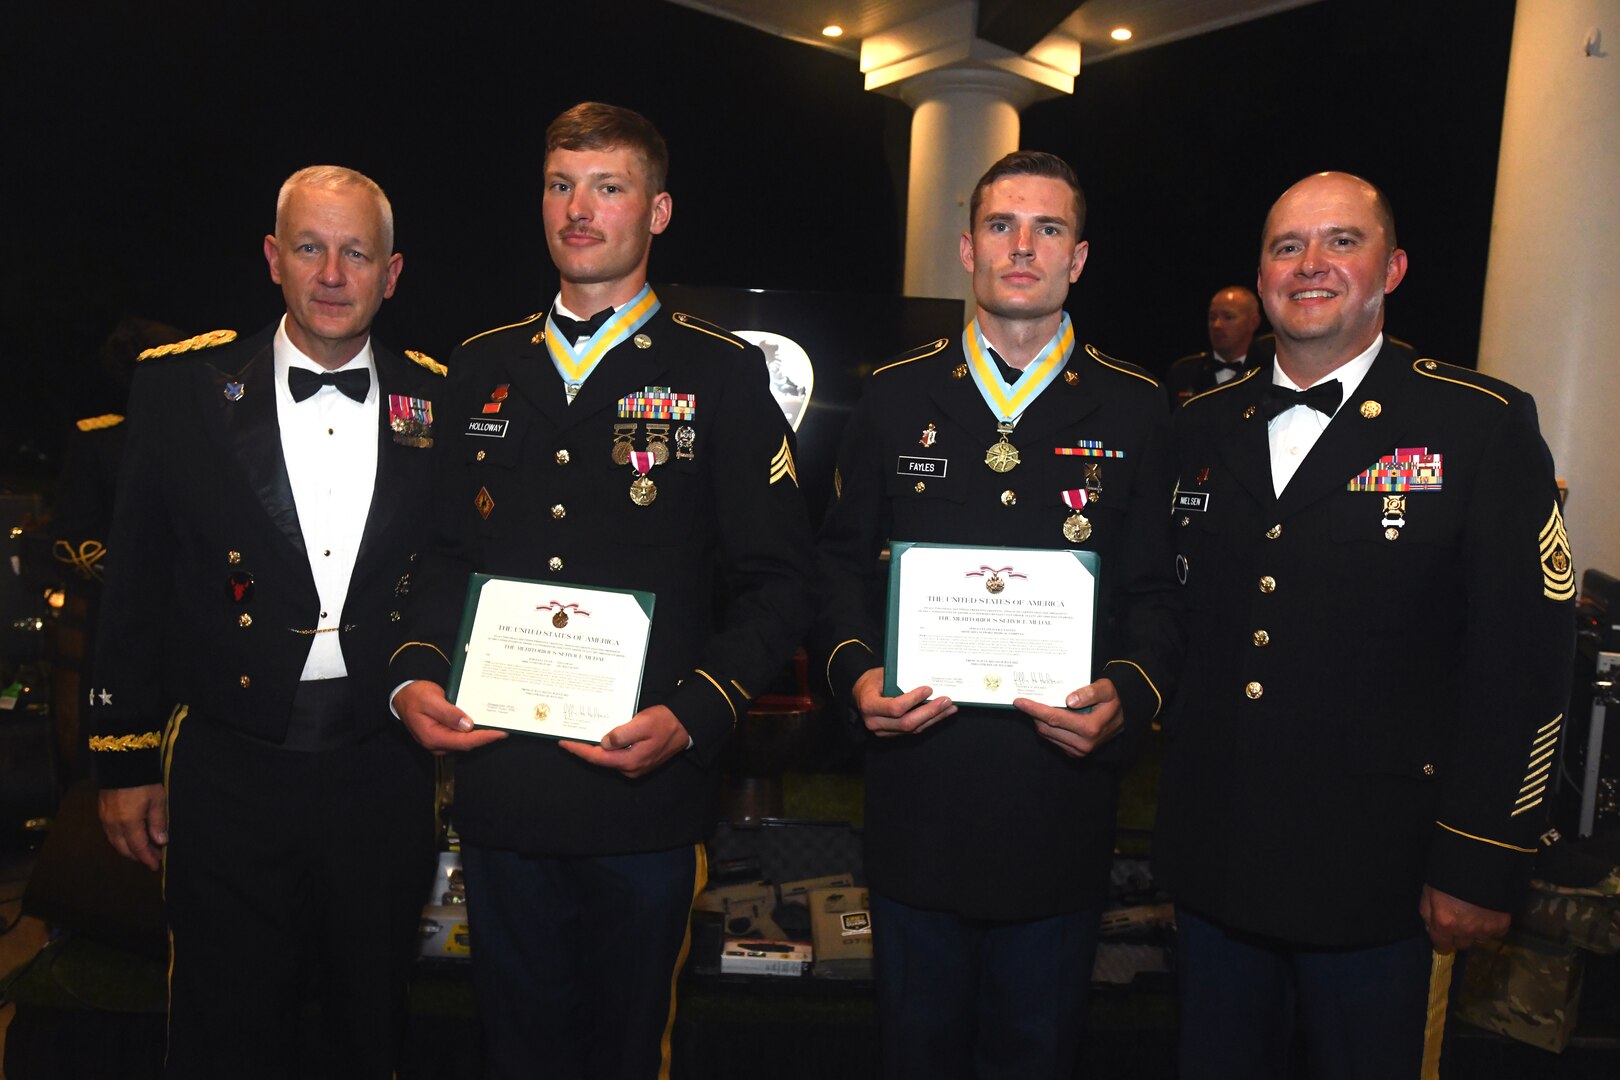 From left to right, Army Lt. Gen. Jon A. Jensen, director of the Army National Guard, Sgt. Tyler Holloway, with the Wyoming Army National Guard, Sgt. Spencer Fayles, with the Utah Army National Guard and Command Sgt Maj. Spencer Nielsen, senior enlisted leader of the Utah National Guard, showcase Holloway and Fayles’ Meritorious Service Medal awards during the closing ceremony of the 2022 Army National Guard Best Warrior Competition in Nashville, Tennessee, July 29, 2022.